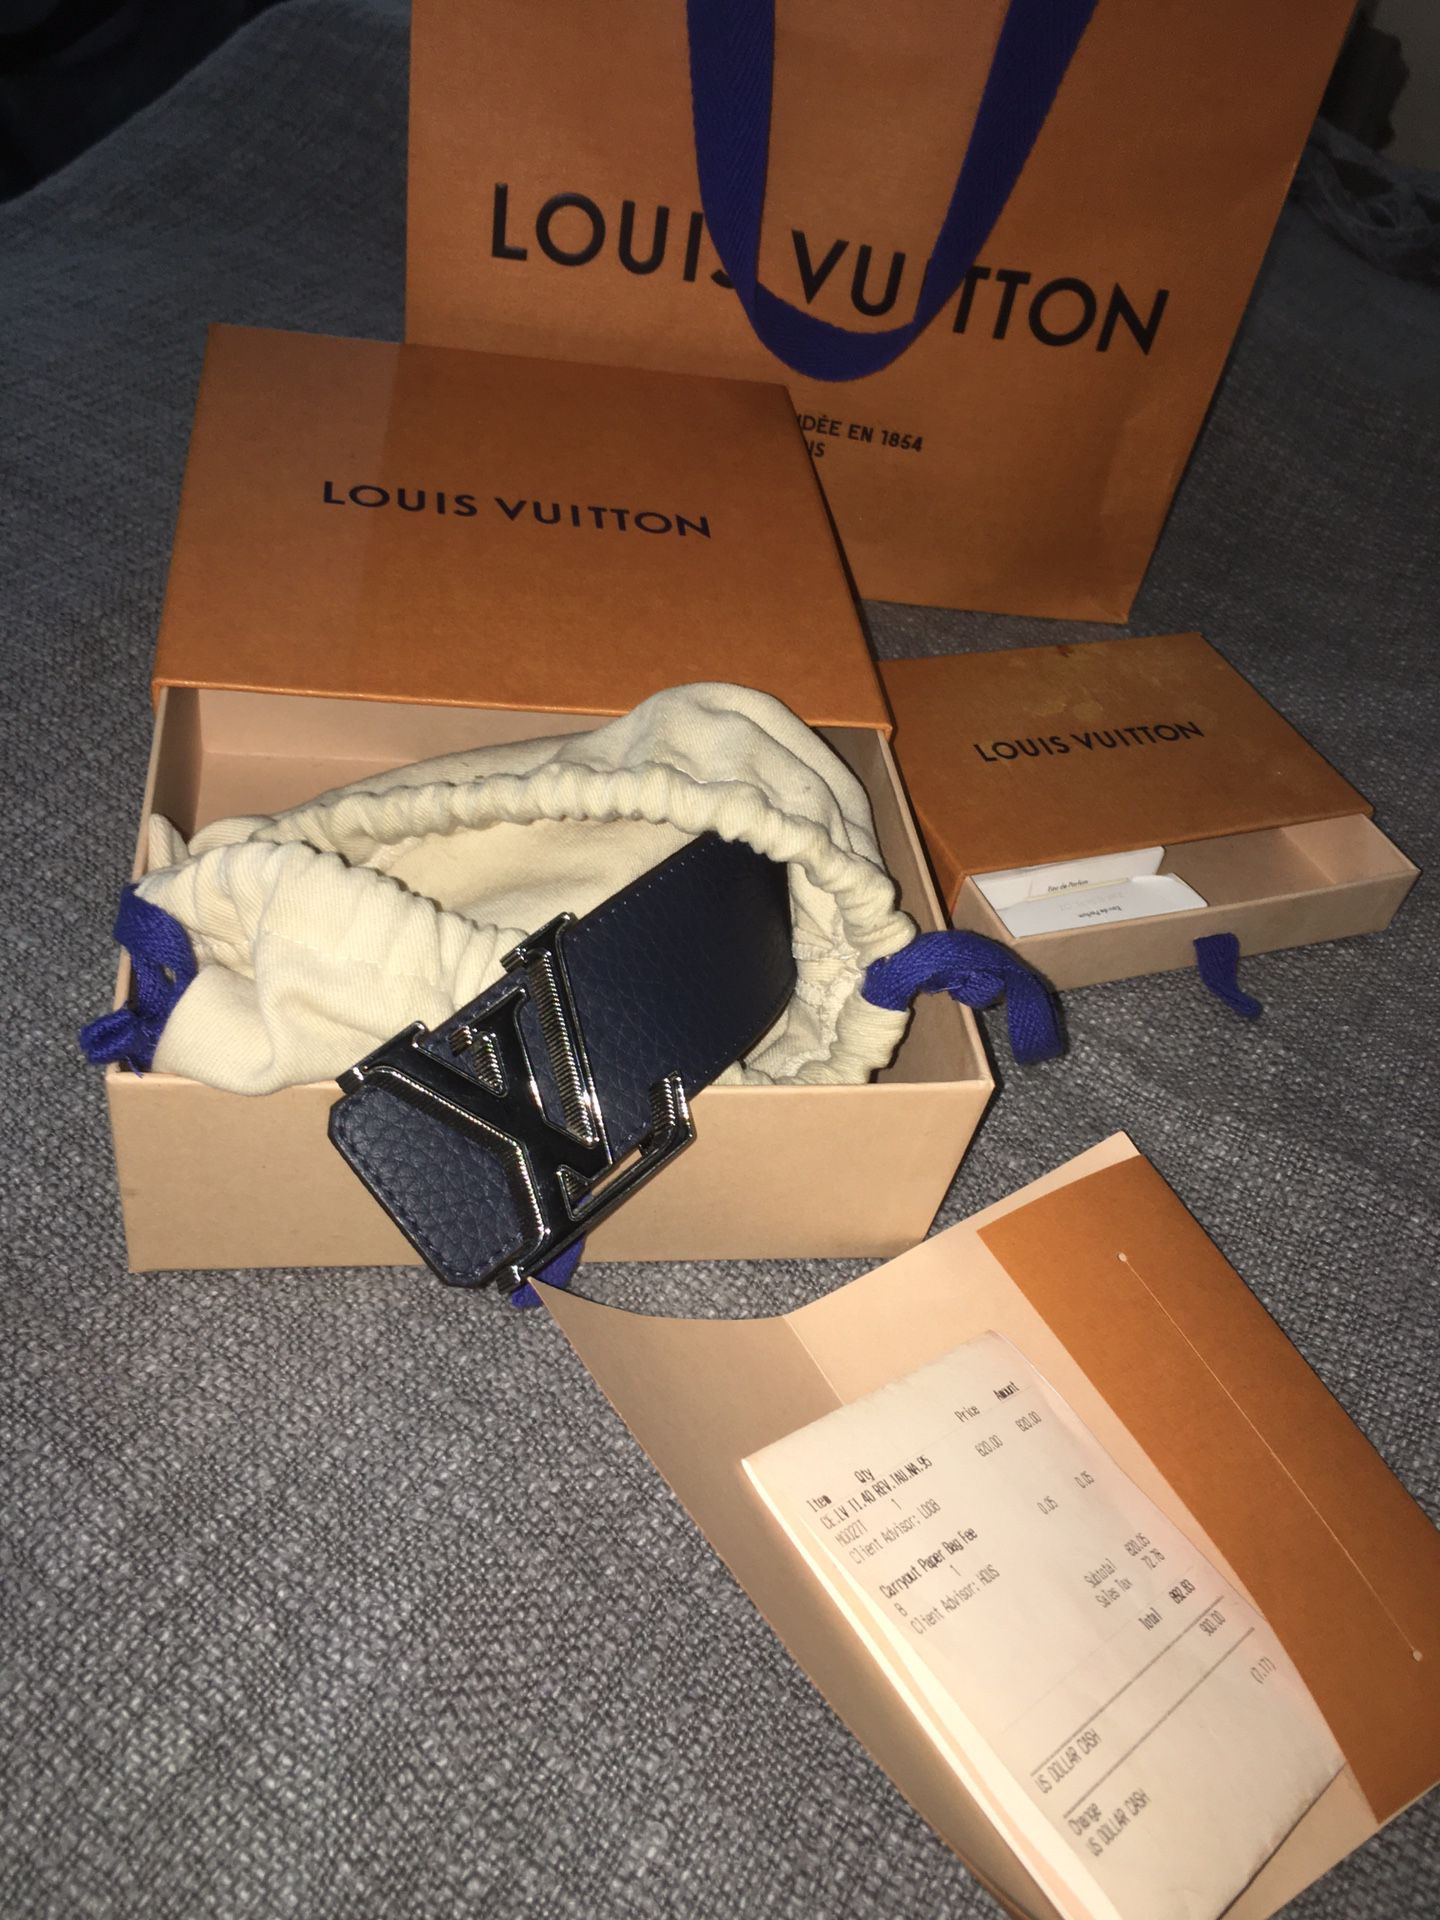 Men's Louis Vuitton Belt 50/125 for Sale in Cleveland, OH - OfferUp